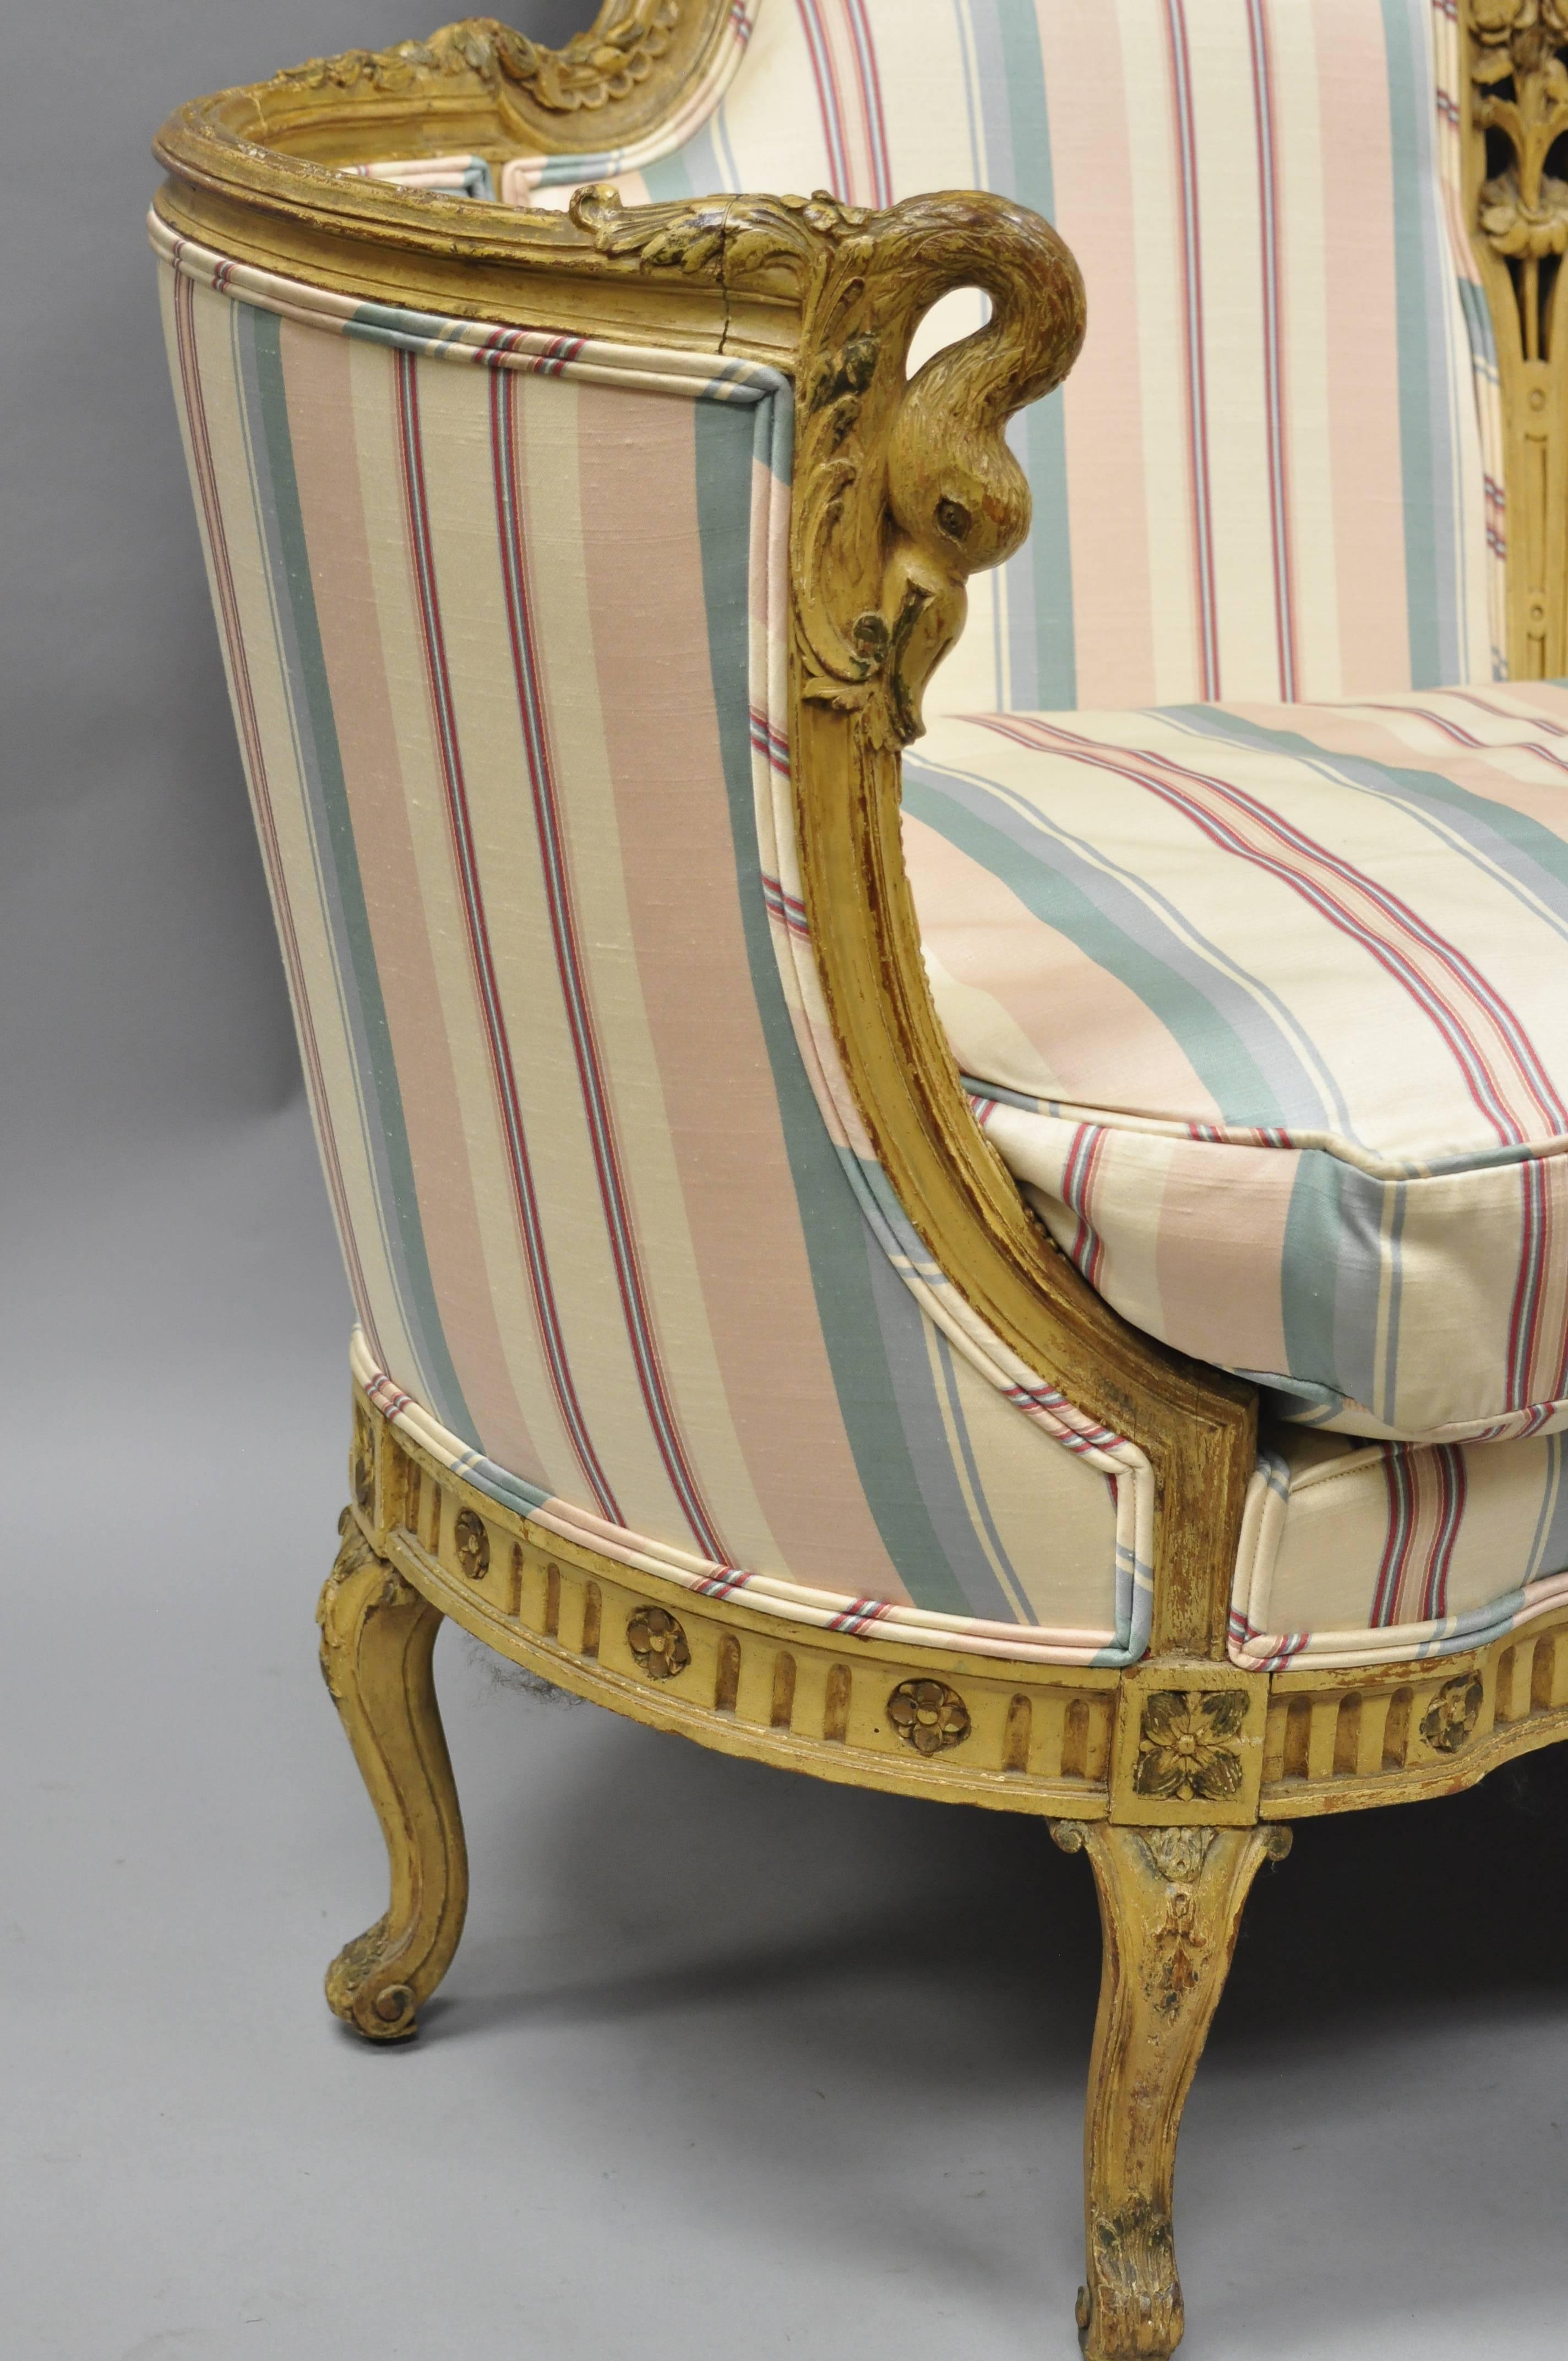 Mid-20th Century French Regency Style Cream Painted Loveseat Settee Sofa with Swan Carvings